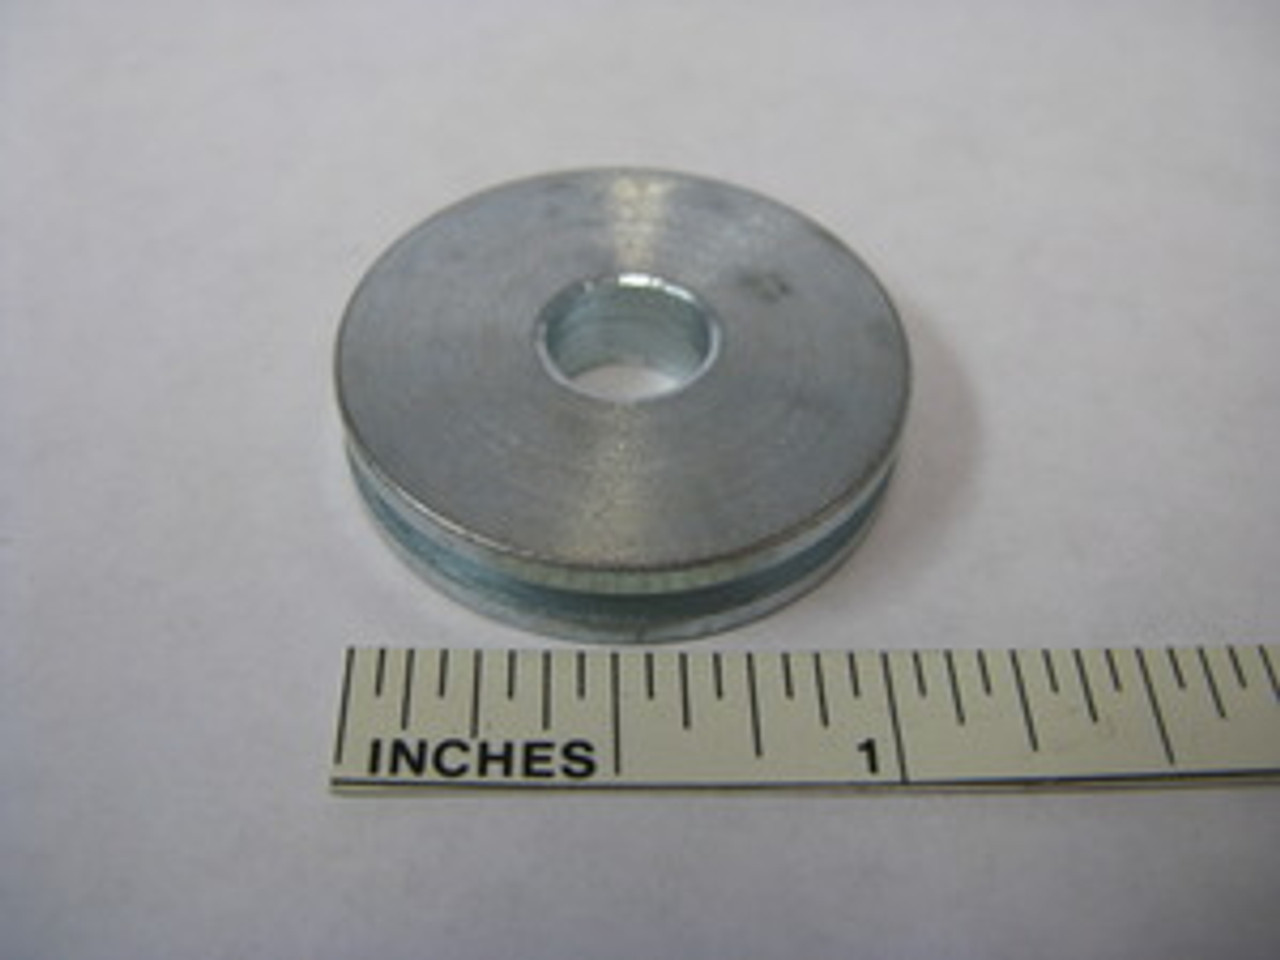 JSJ4-02-09 Lock Release Sheave Pulley for Challenger E10 & E12 Lifts